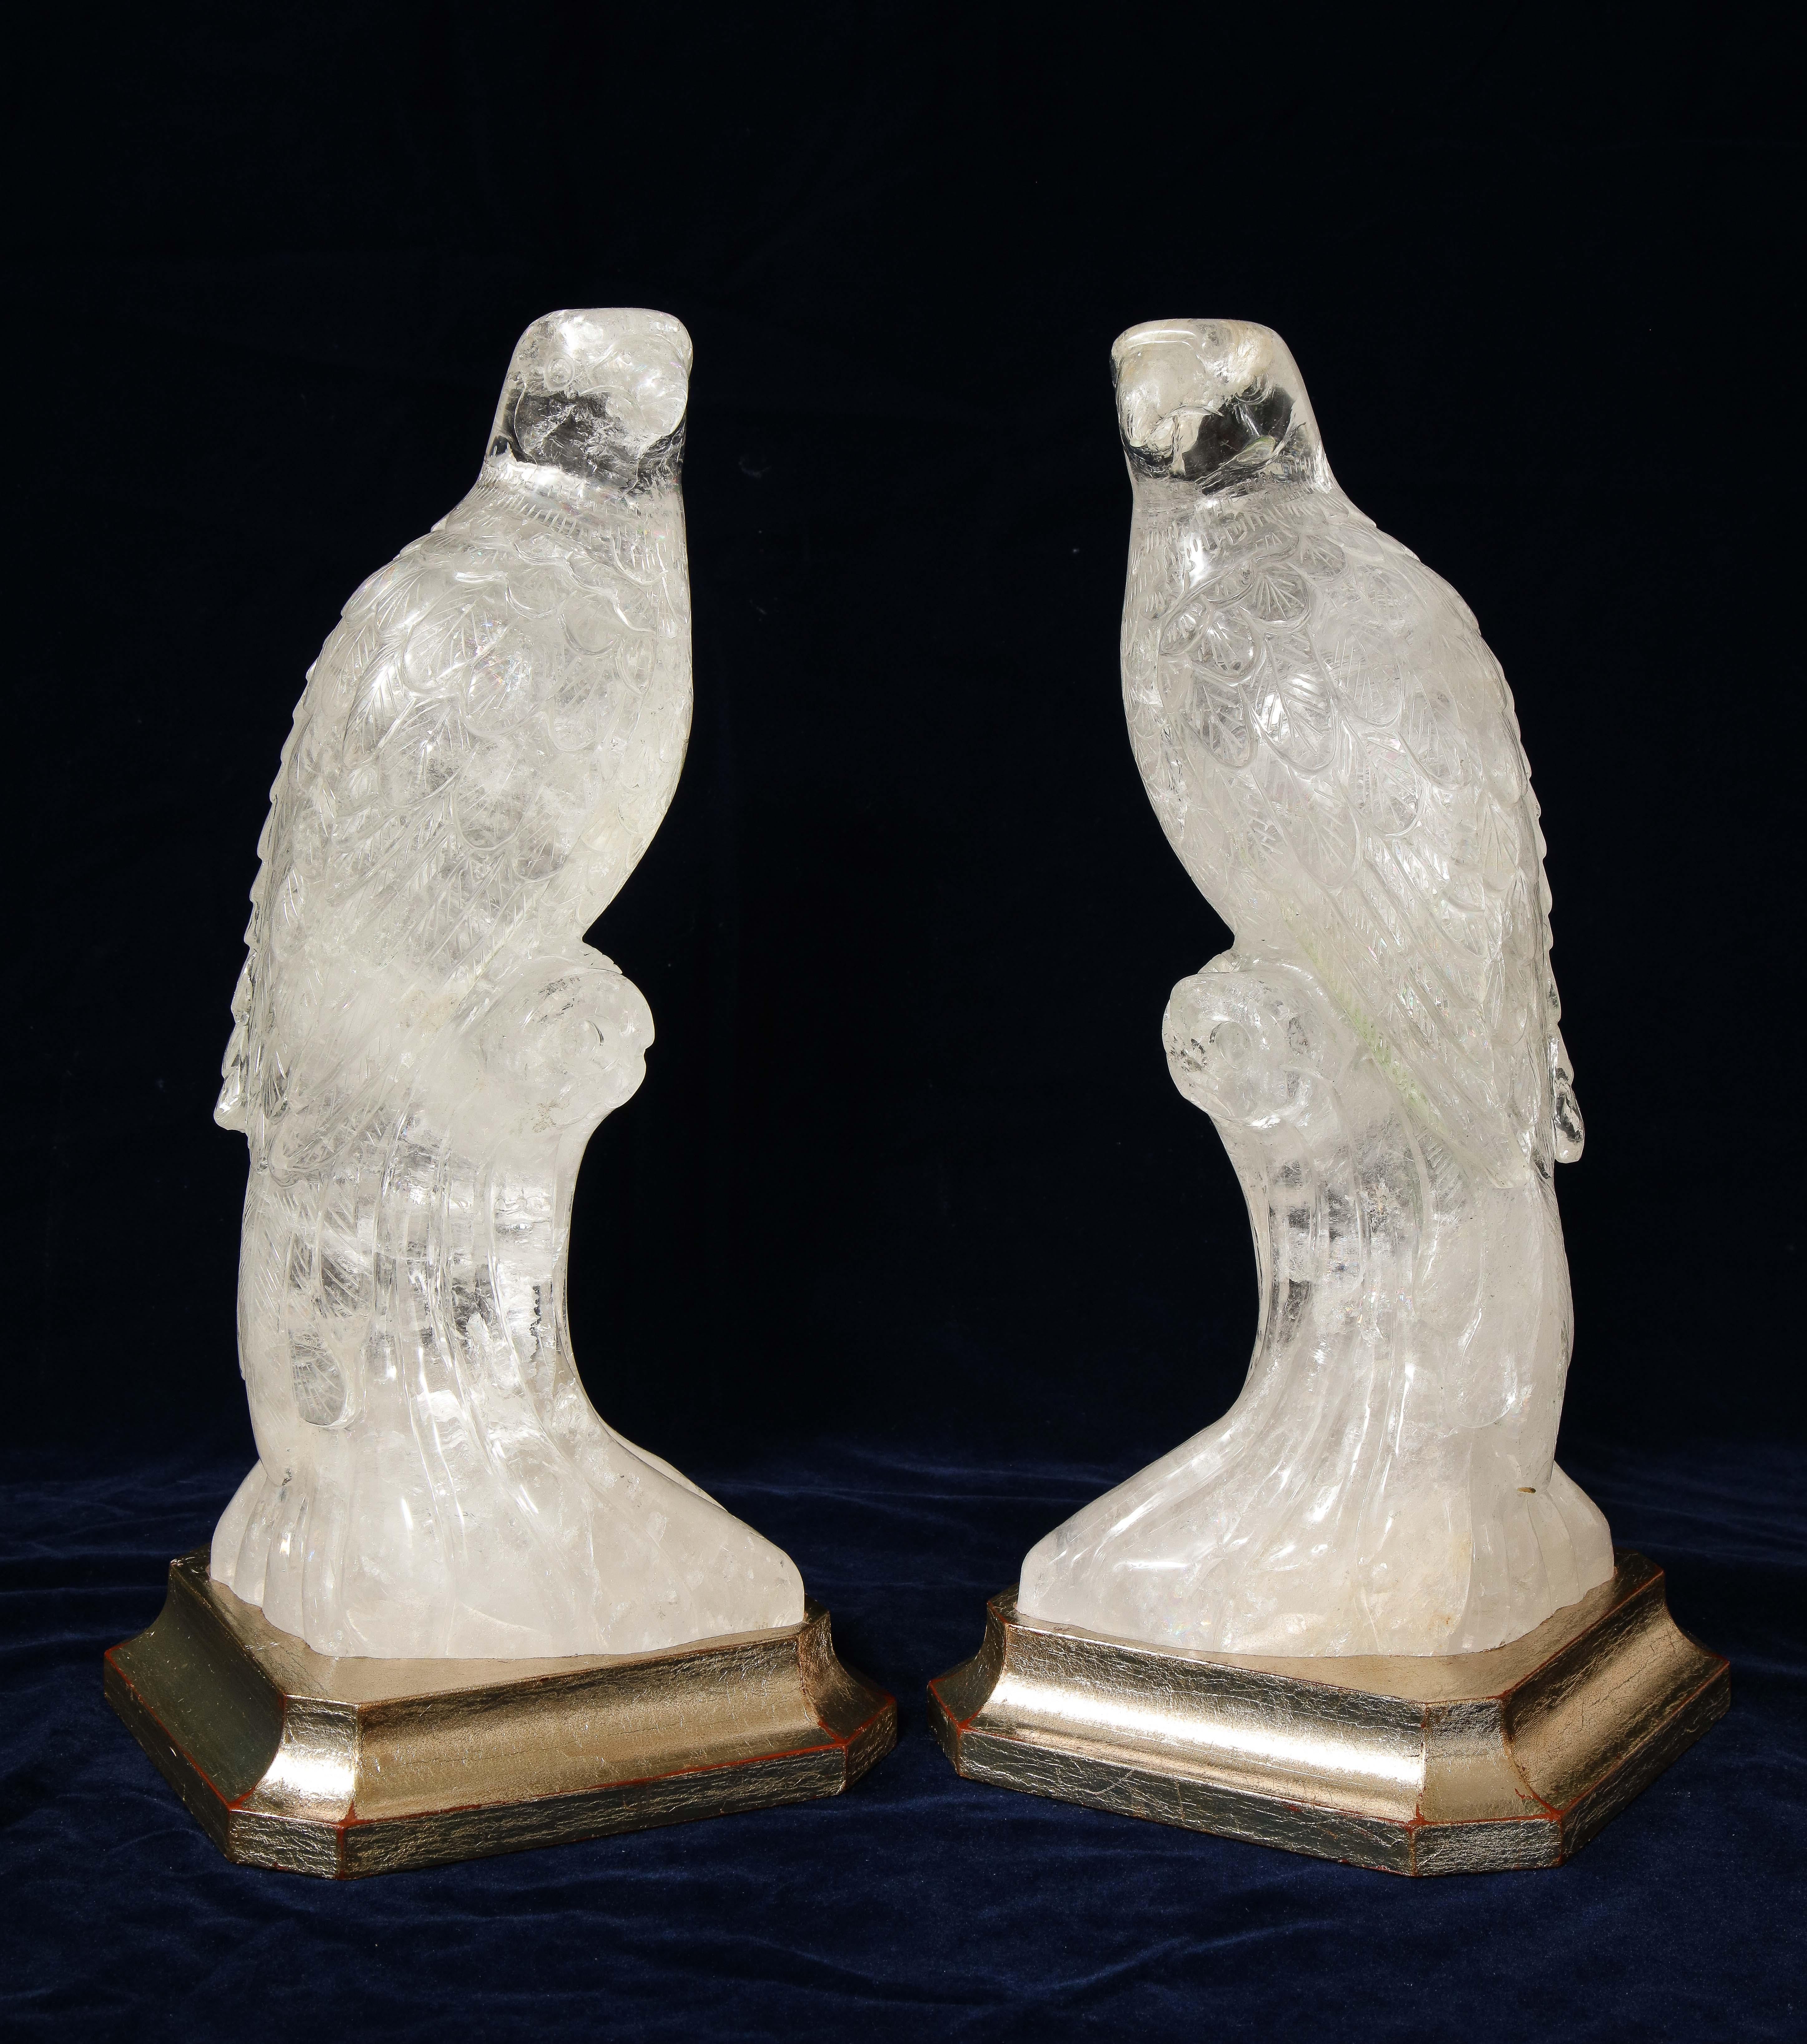 A beautiful pair of hand carved and hand-polished clear rock-crystal quartz parrots on silver-gilt bases. Each is beautifully hand carved and further hand-polished with meticulous detail and craftsmanship. Each parrot is naturalistically resting on